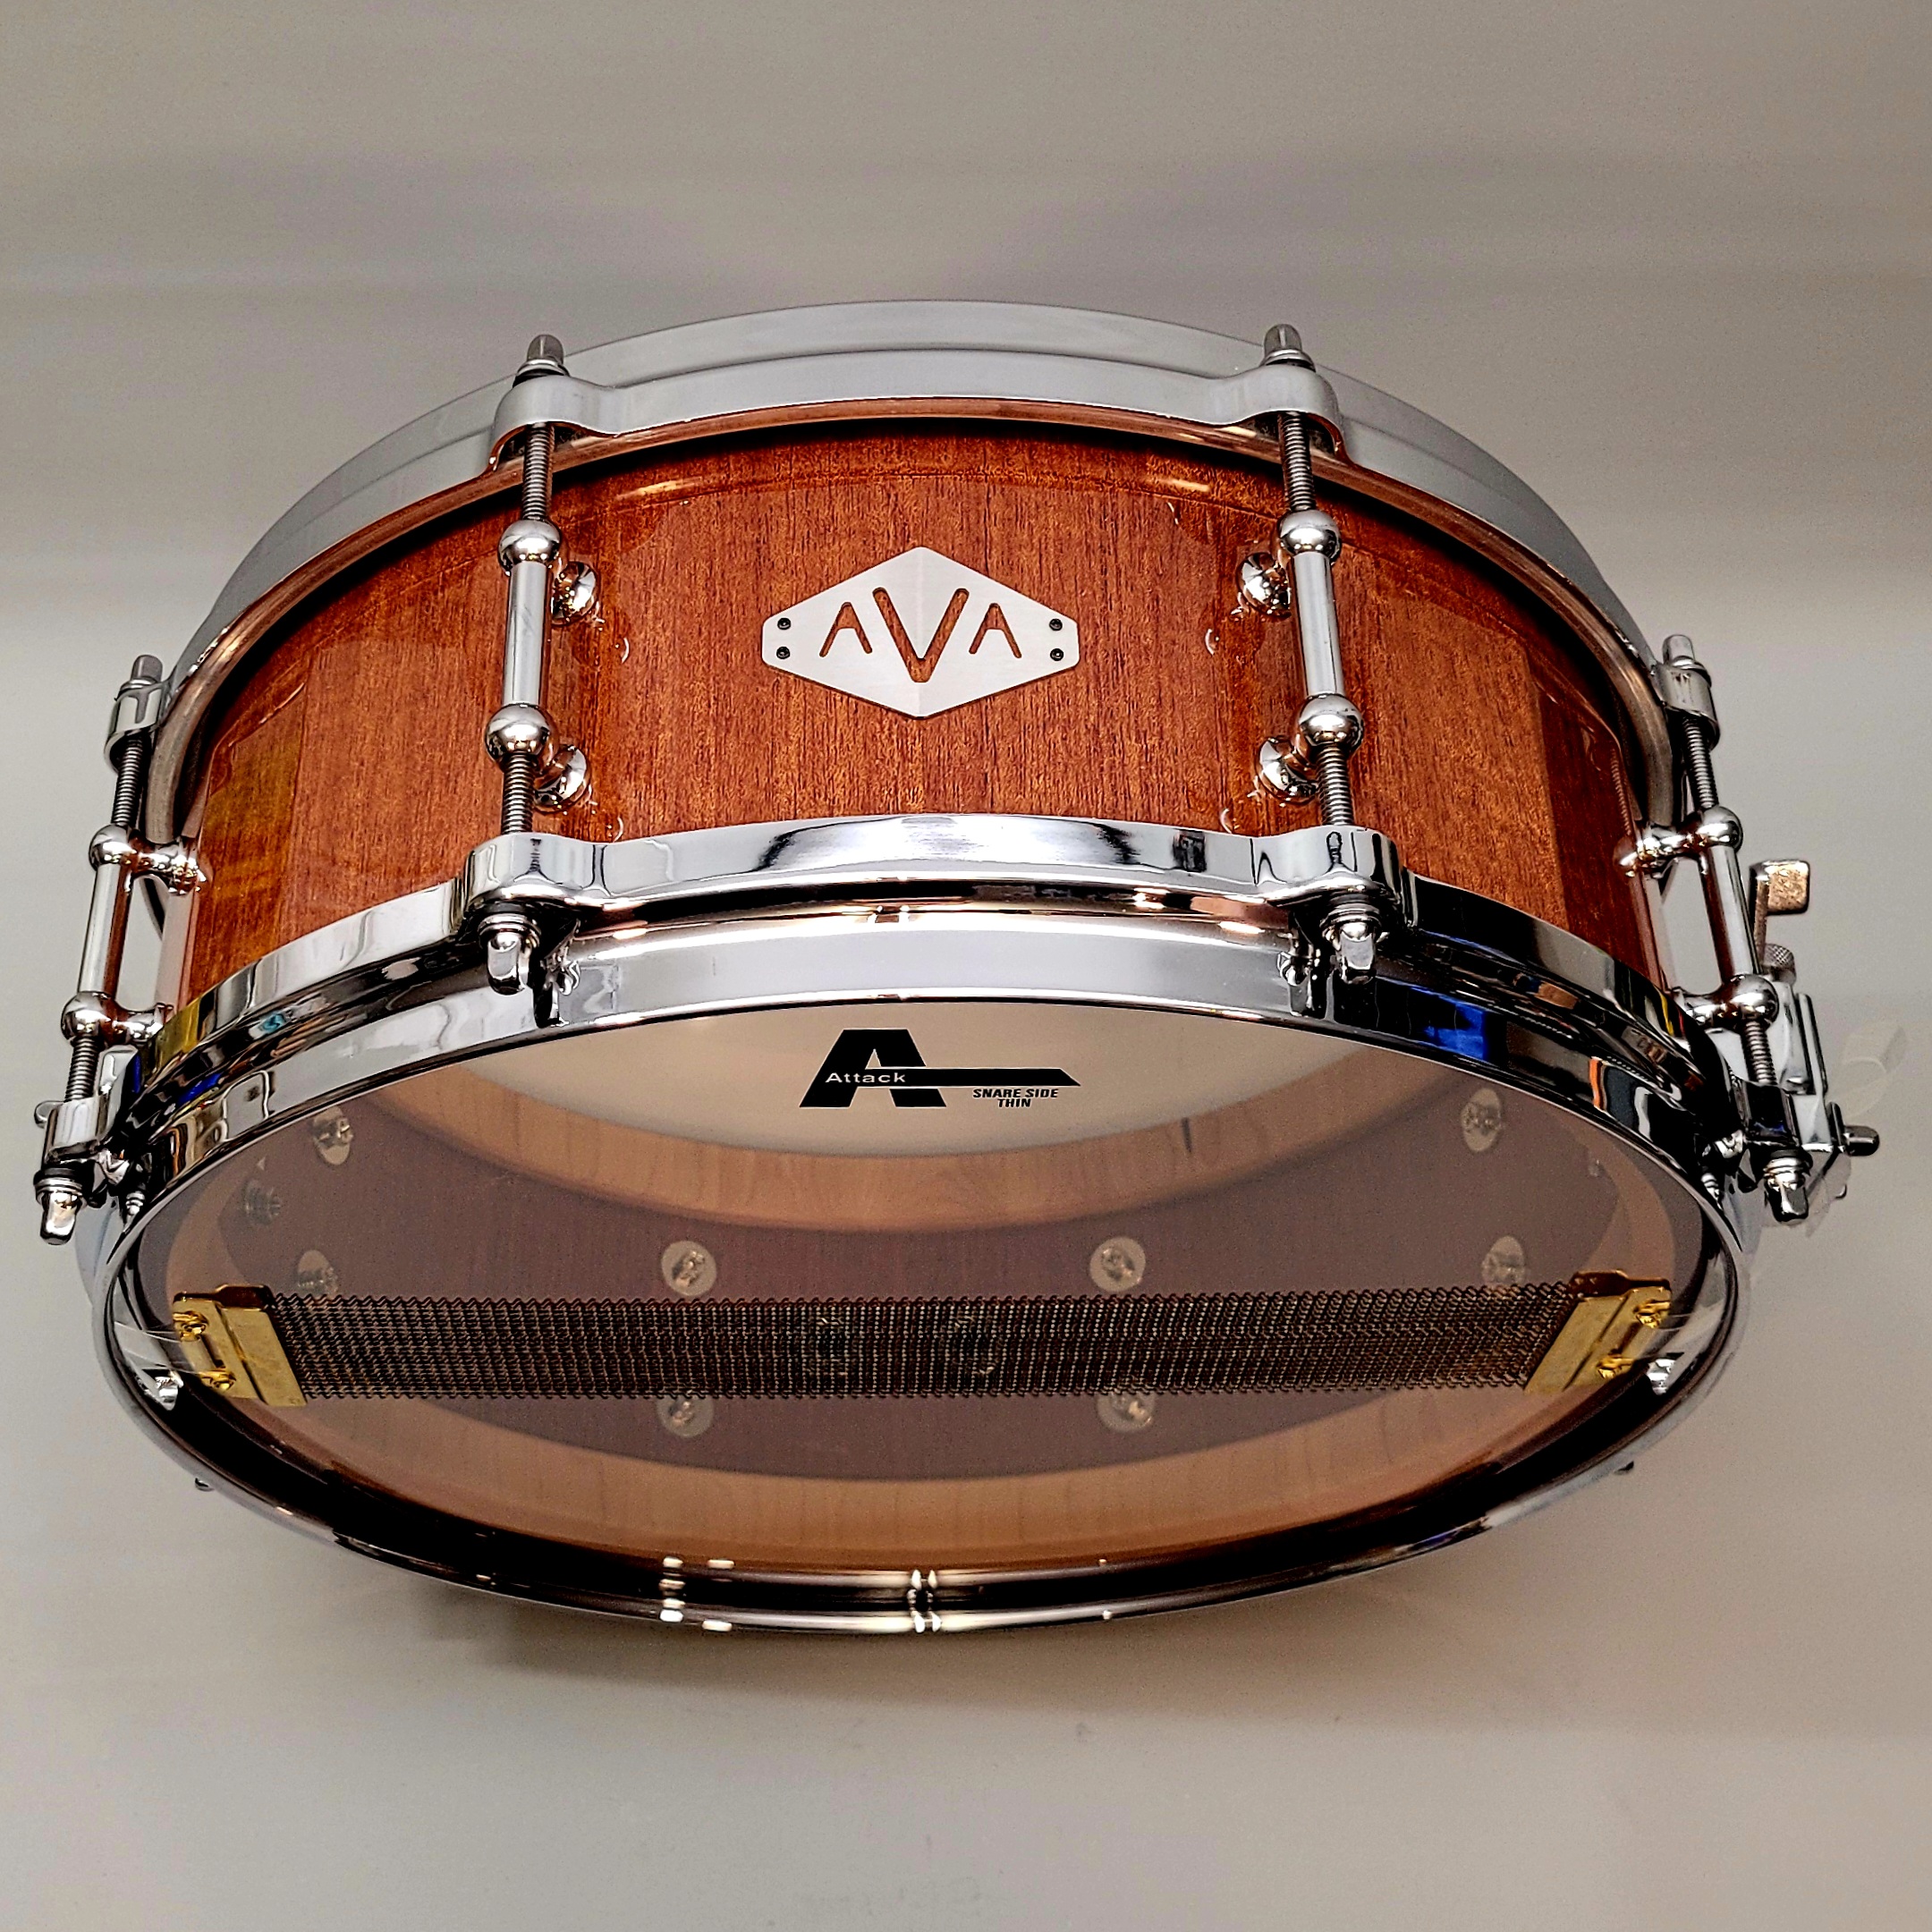 13 X 5 MAHOGANY STABLE-STAVE